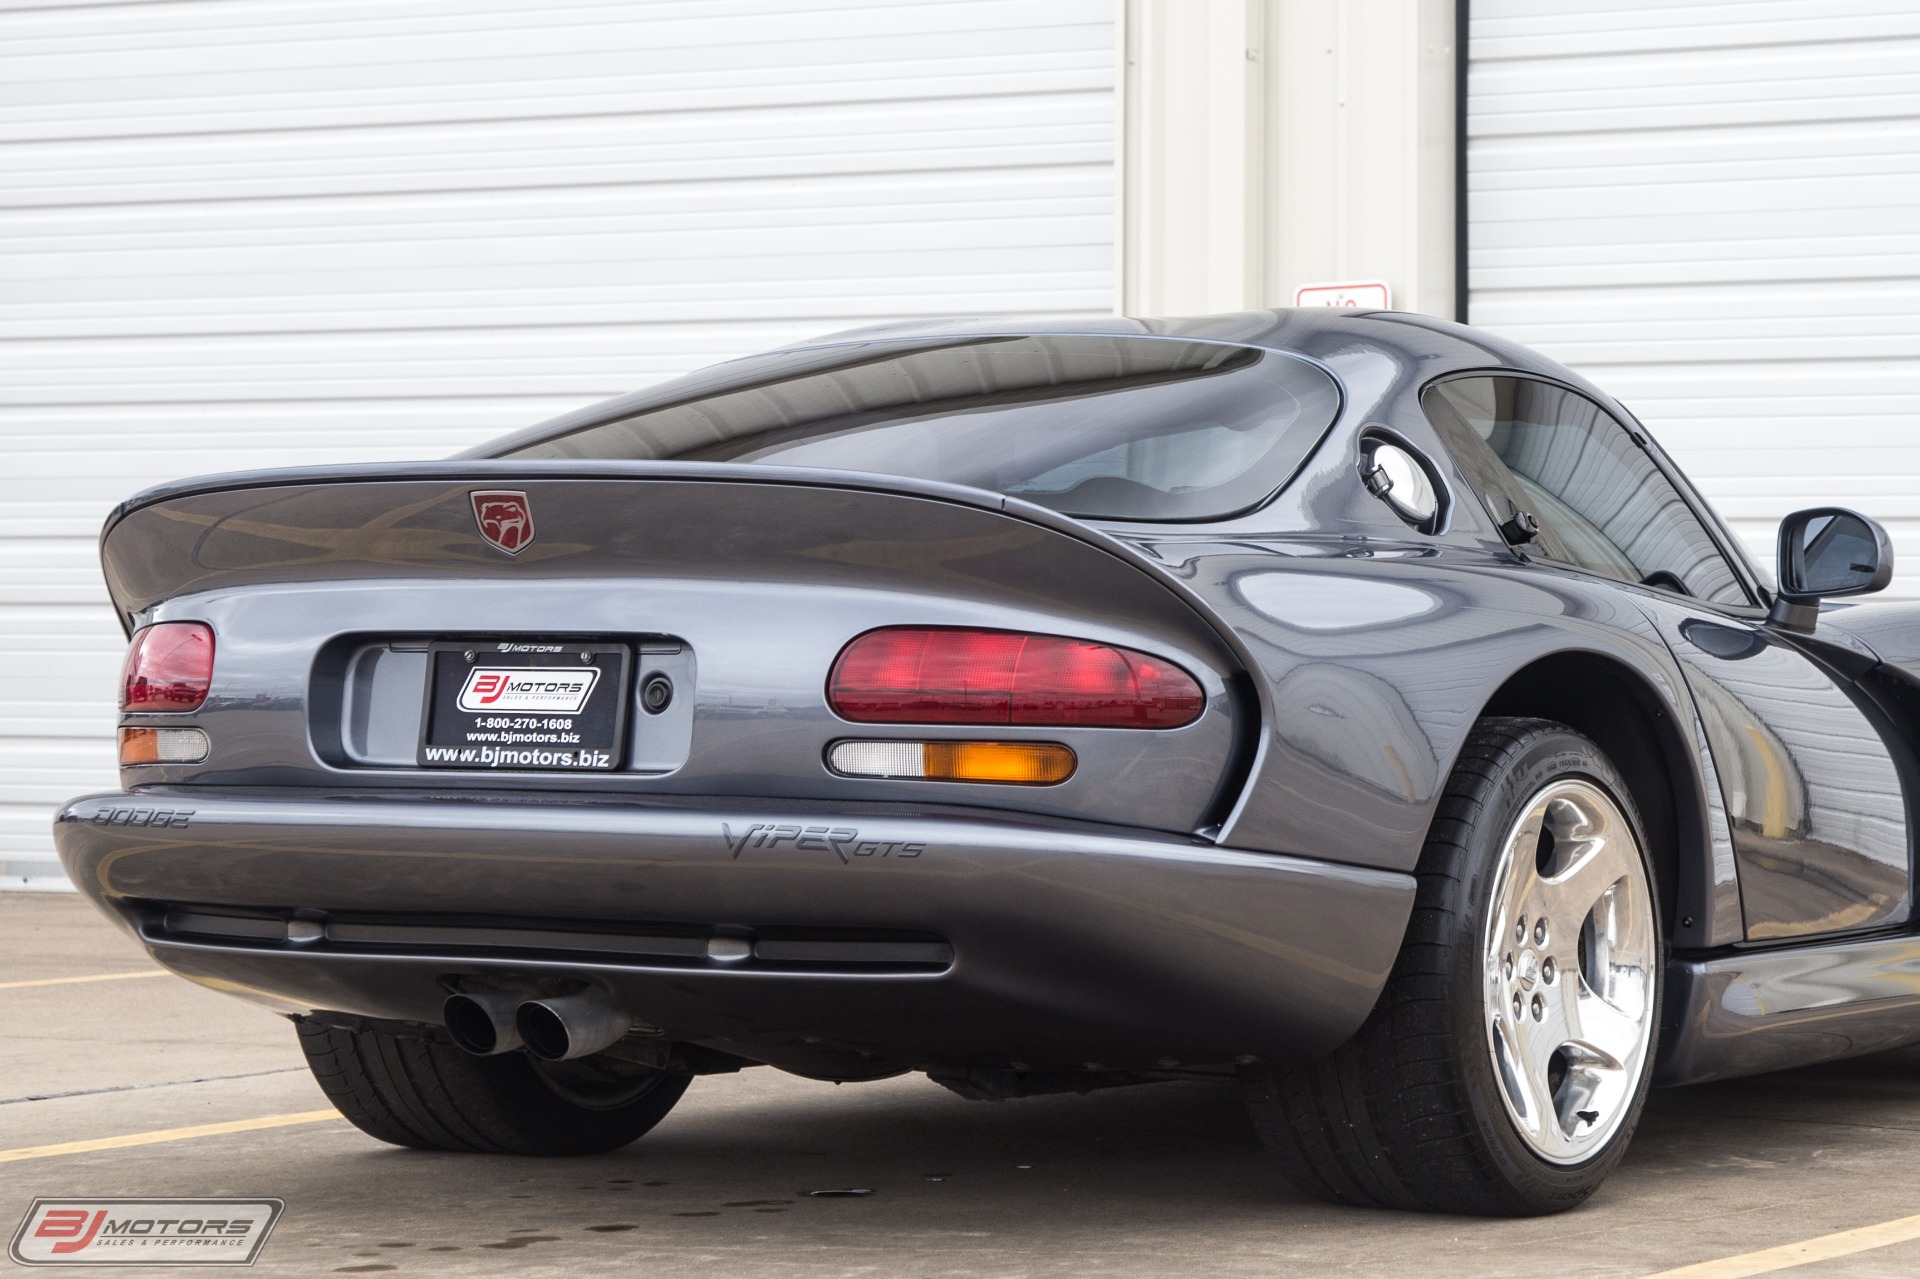 Used 2000 Dodge Viper GTS Steel Gray 1 Year Color For Sale